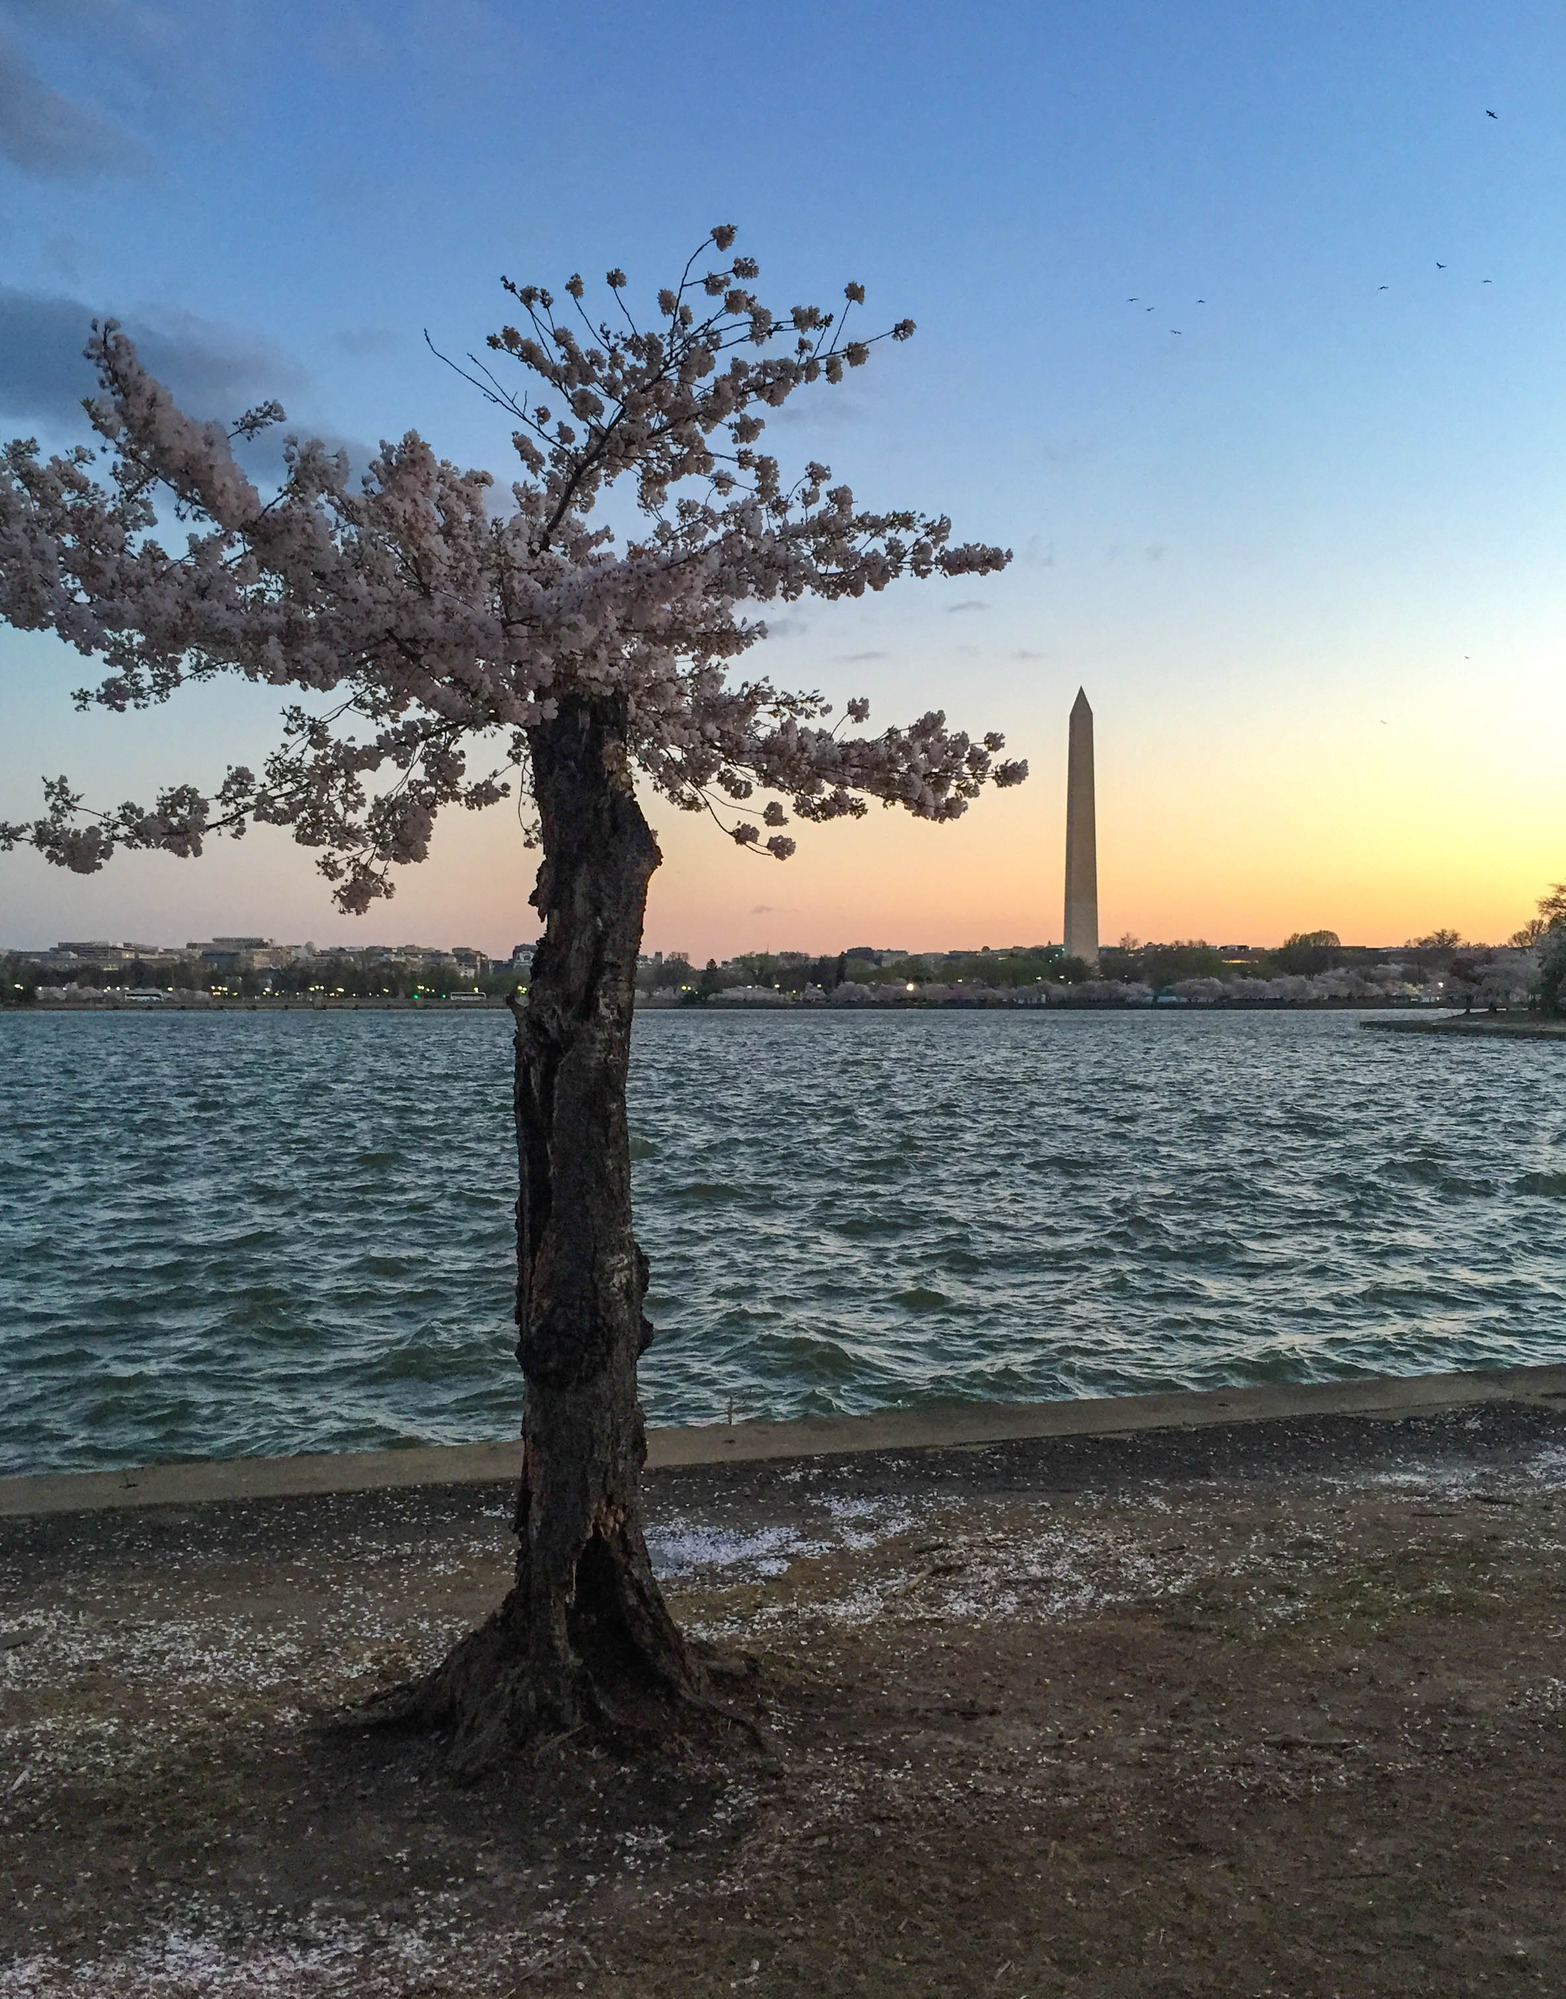 A single cherry tree stands in the foreground with the Washington Monument in the background. The light is dusky